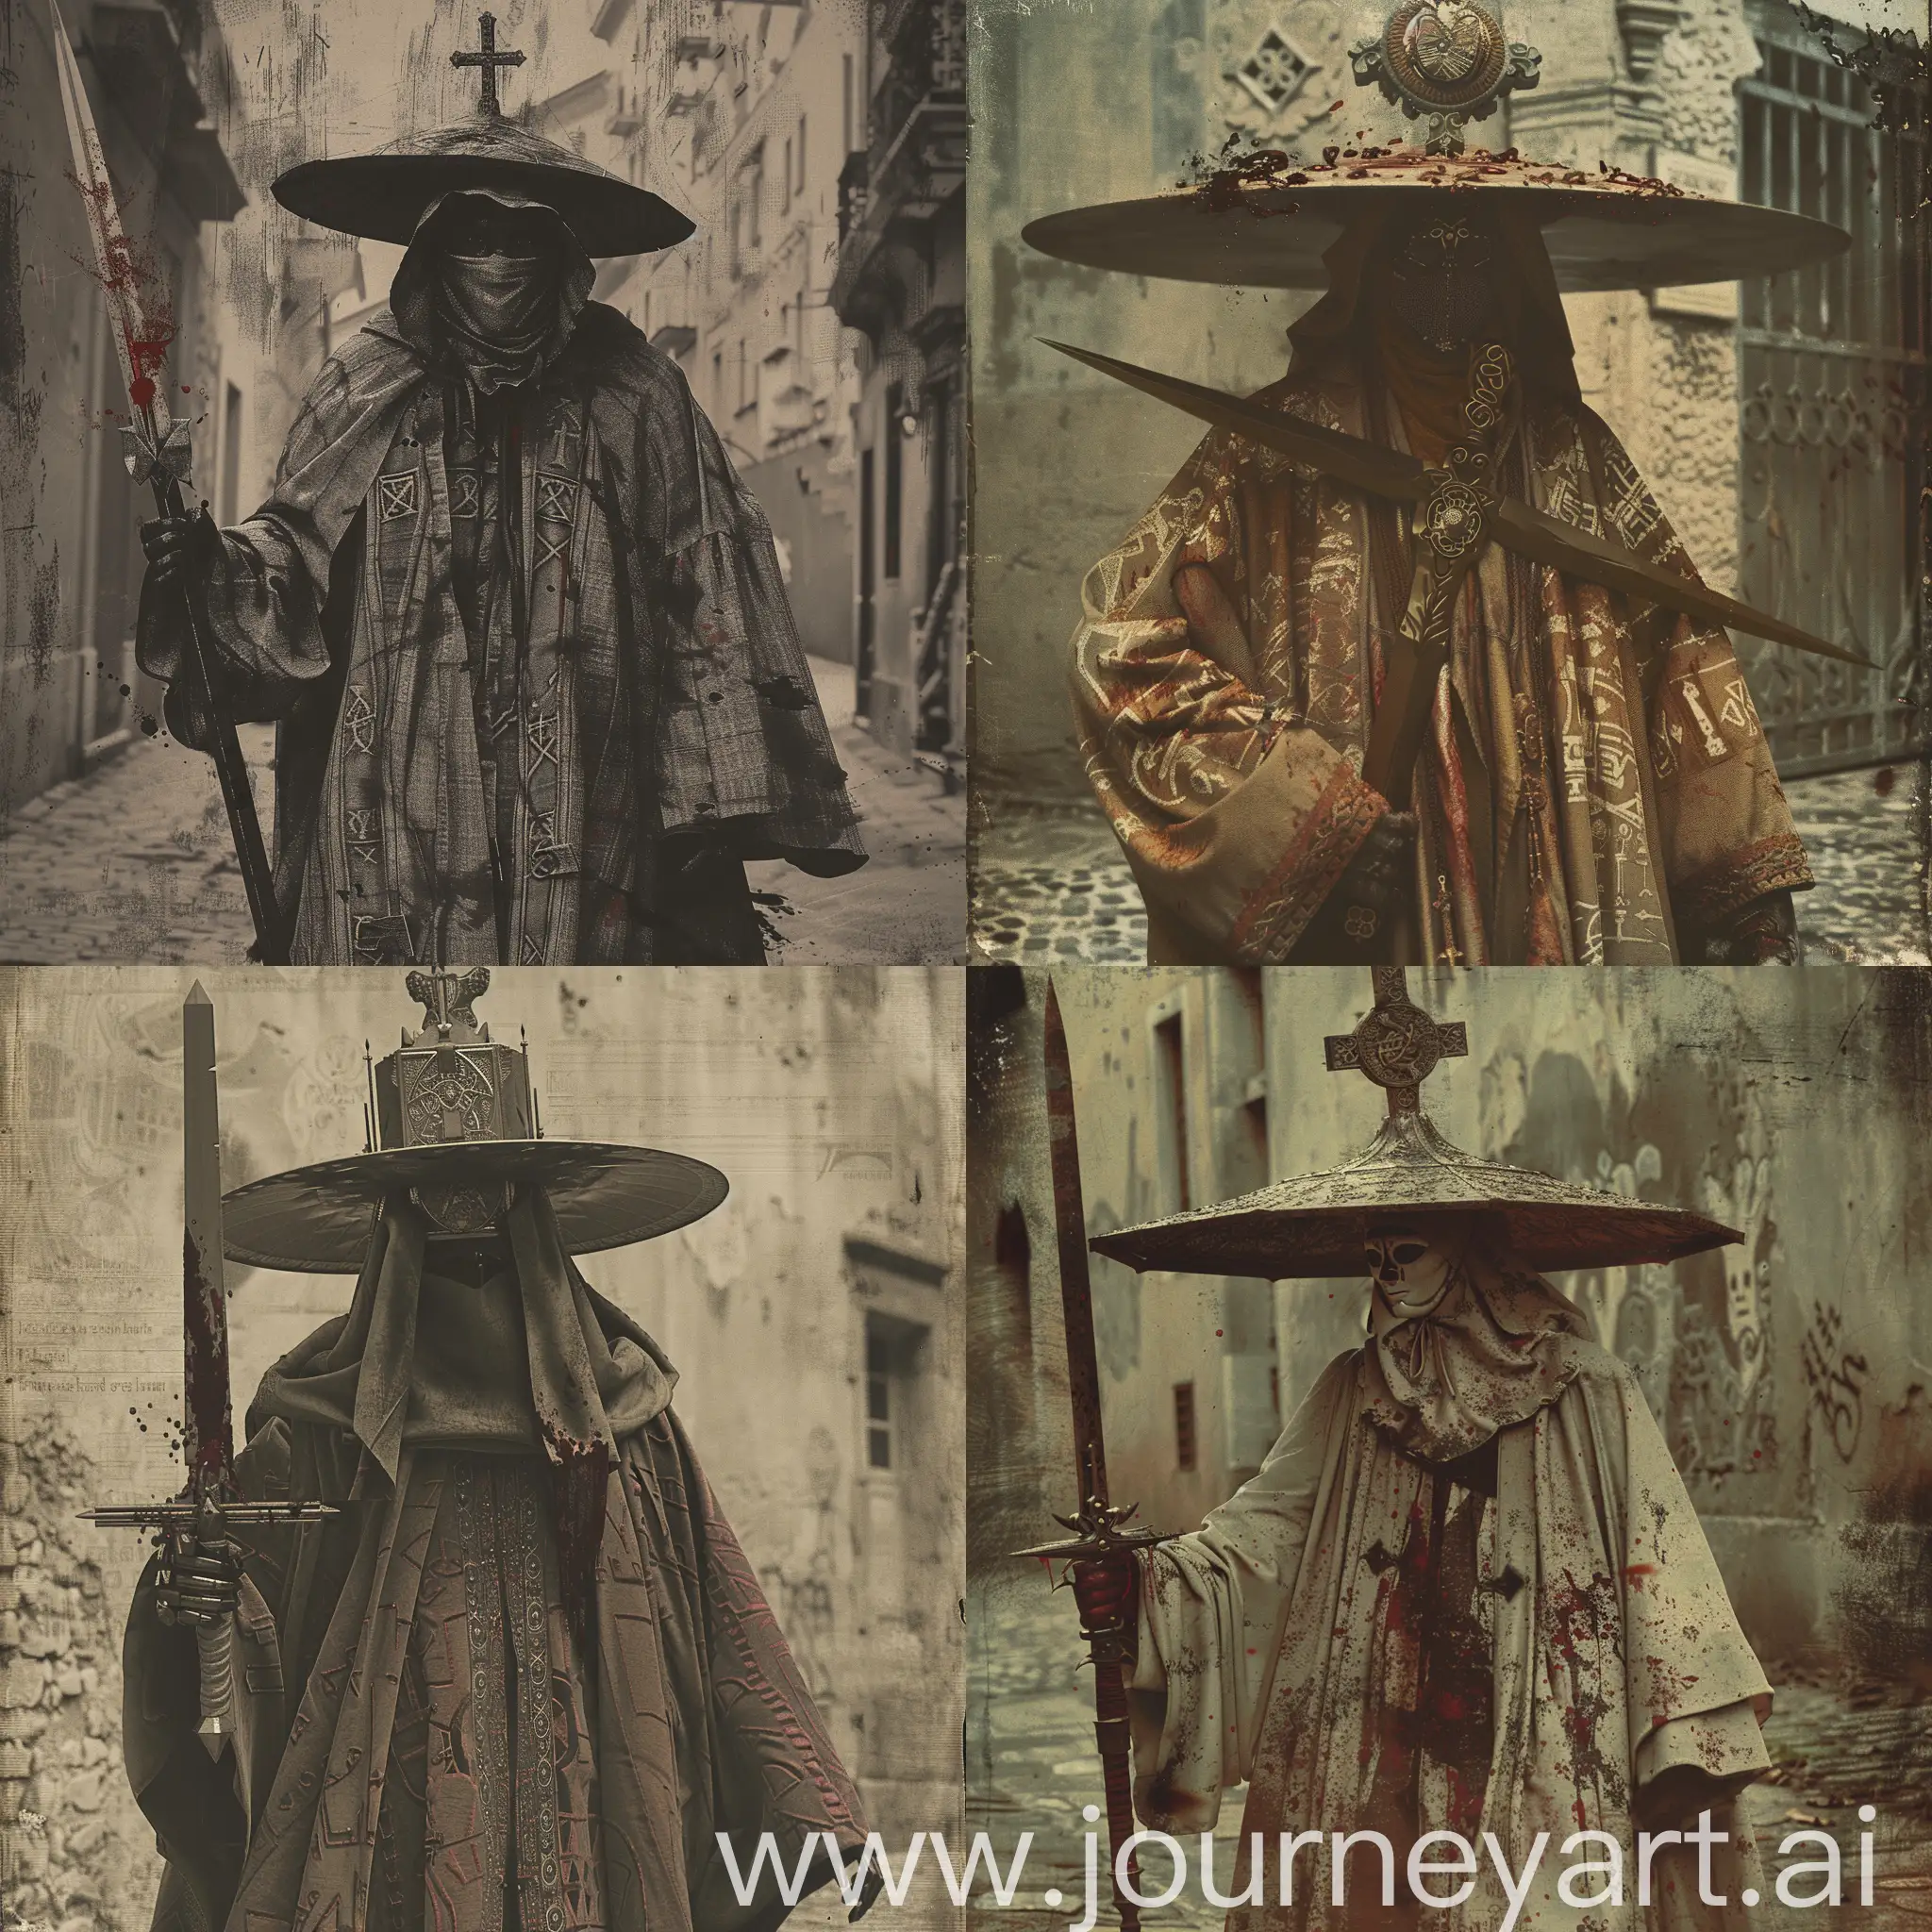 A scholarly figure roams the streets, draped in robes of ancient wisdom. Their face is obscured by a veiled mask, hinting at the forbidden knowledge they seek. Atop their head rests a wide-brimmed hat adorned with arcane symbols, marking them as a member of the esoteric Choir, wielding a cross sword, 1970's dark fantasy book cover style, gritty, dark, vintage, detailed, full body shot camera angle, bloody weapon